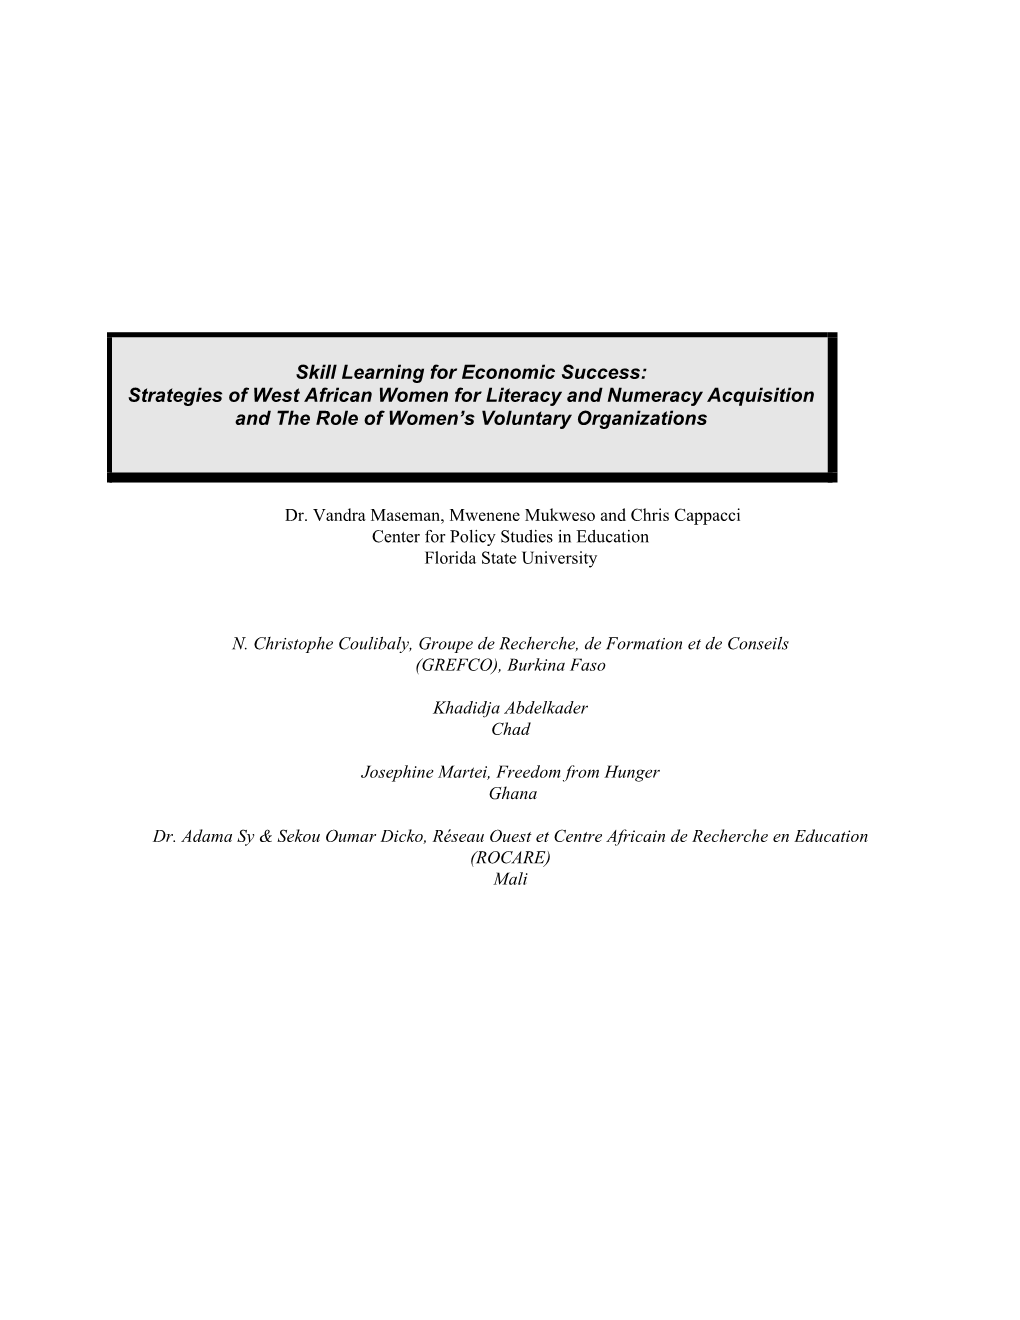 Skill Learning for Economic Success: Strategies of West African Women for Literacy and Numeracy Acquisition and the Role of Women’S Voluntary Organizations